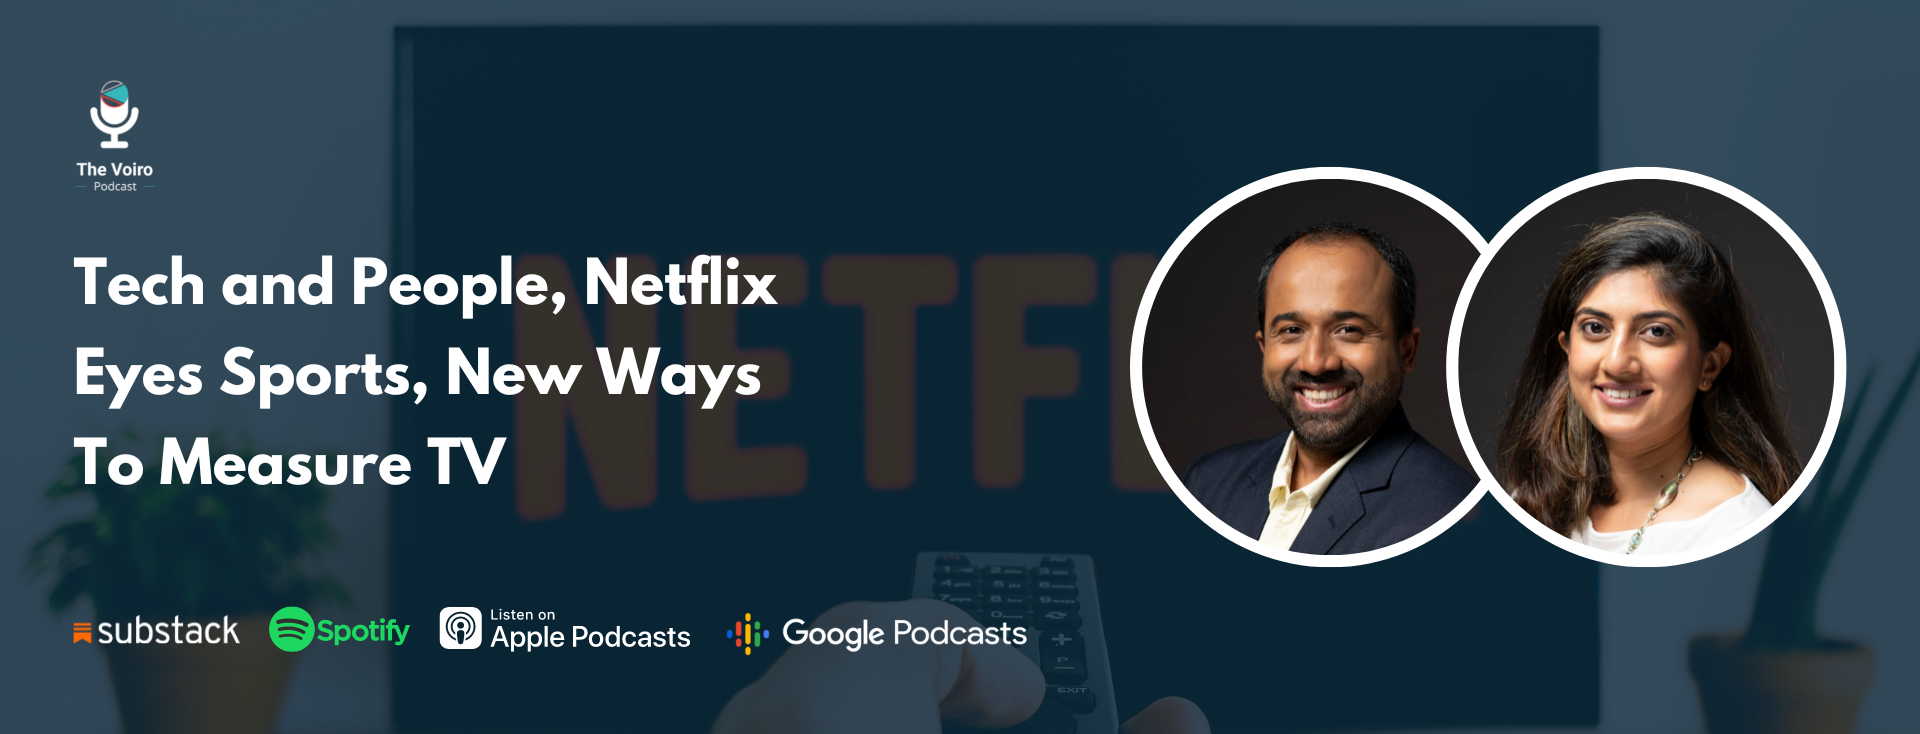 https://voiro.com/podcast/tech-and-people-netflix-eyes-sports-new-ways-to-measure-tv